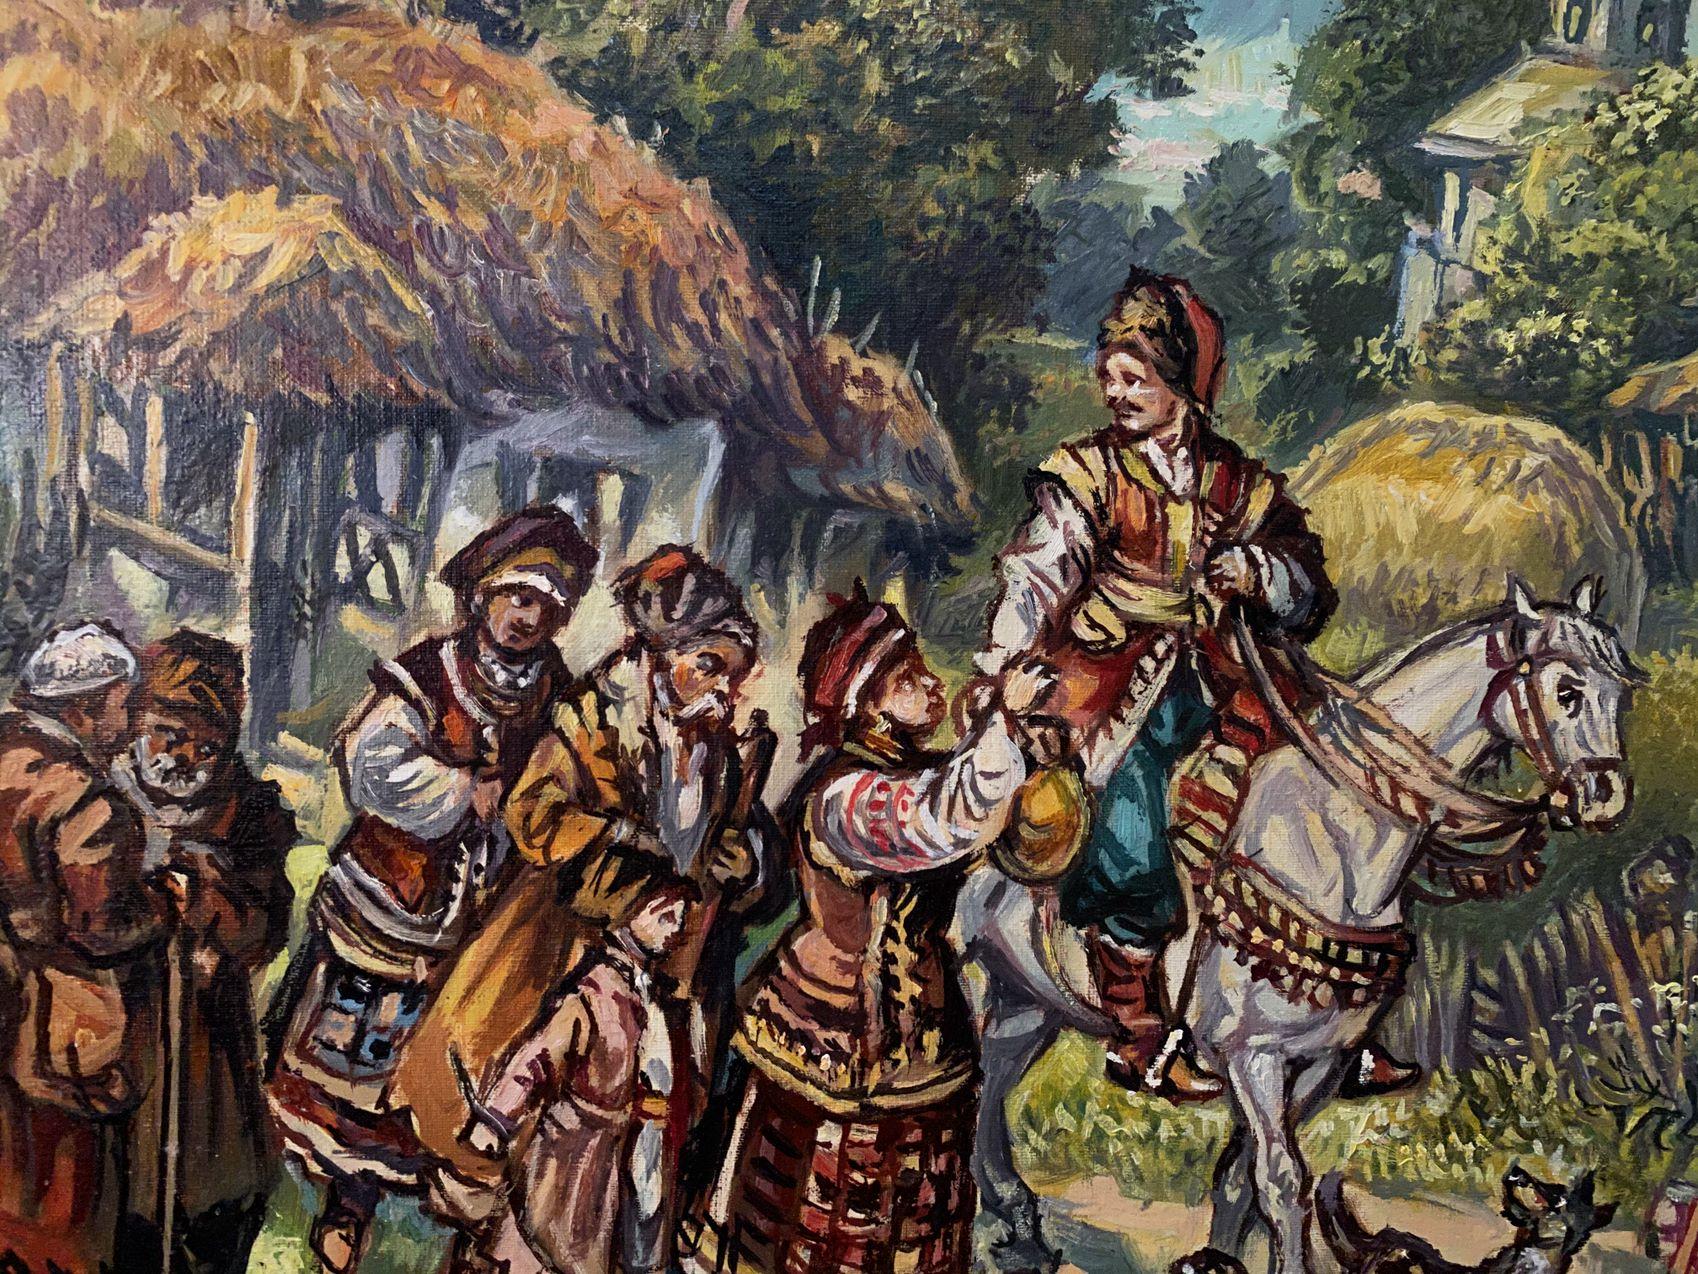 Artist: Alexander Litvinov
Work: Original oil painting, handmade artwork, one of a kind 
Medium: Oil on Canvas
Style: Classic Figurative
Year: 2010
Title: Seeing off the Cossacks
Size: 16